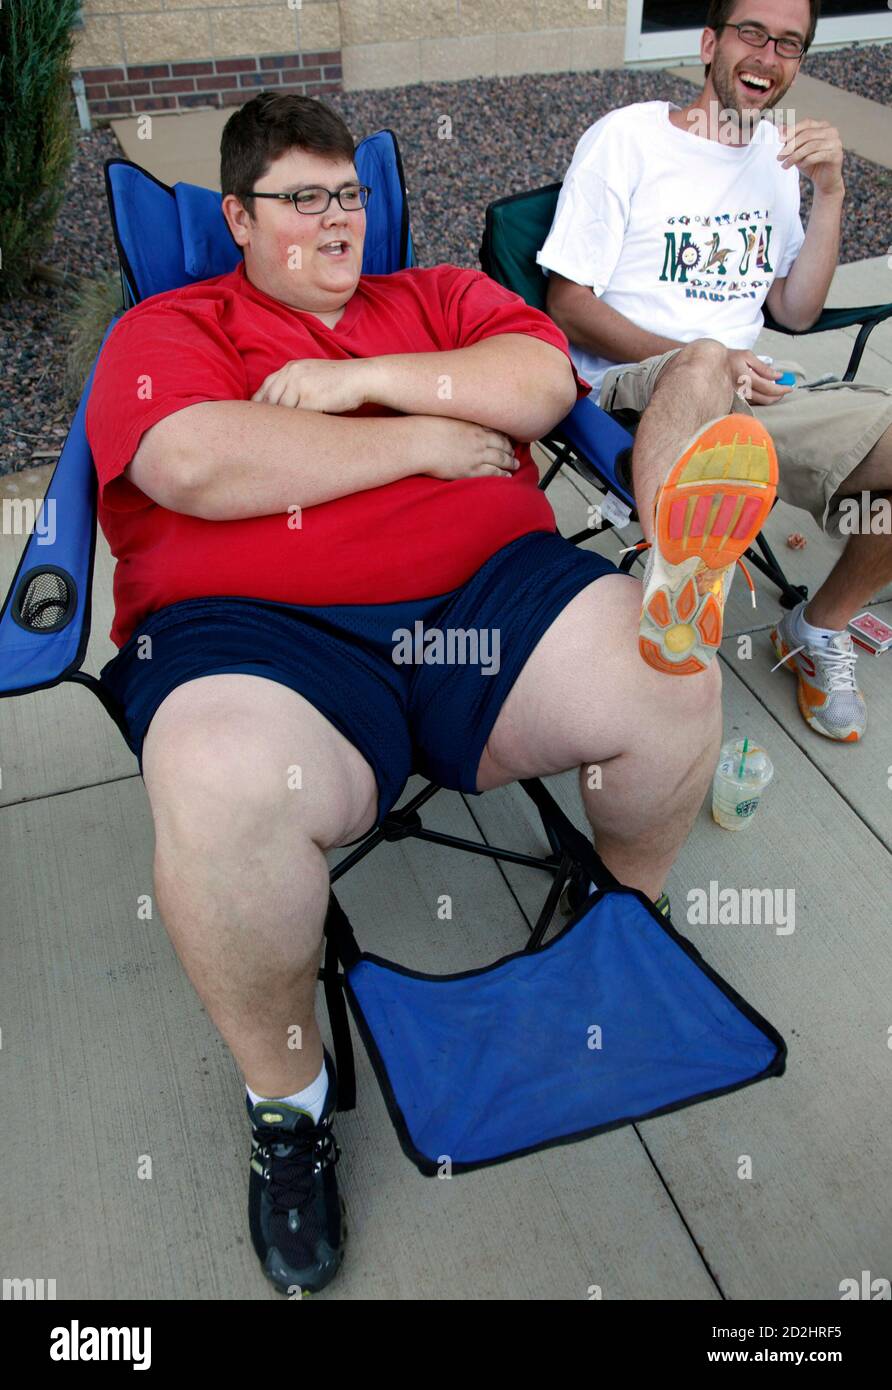 Greg Marthaler, Jr. (L) at 436 pounds (198 kg) waits in line to audition for 'The Biggest Loser' television show with friends including Mark Dahlseng (C) in Broomfield, Colorado July 17, 2010. Several hundred people with more than 100 pounds to lose waited hours in sweltering heat for a chance to be on the 11th season of the show and have a chance to win $250,000.    REUTERS/Rick Wilking (UNITED STATES - Tags: SOCIETY HEALTH ENTERTAINMENT) Stock Photo